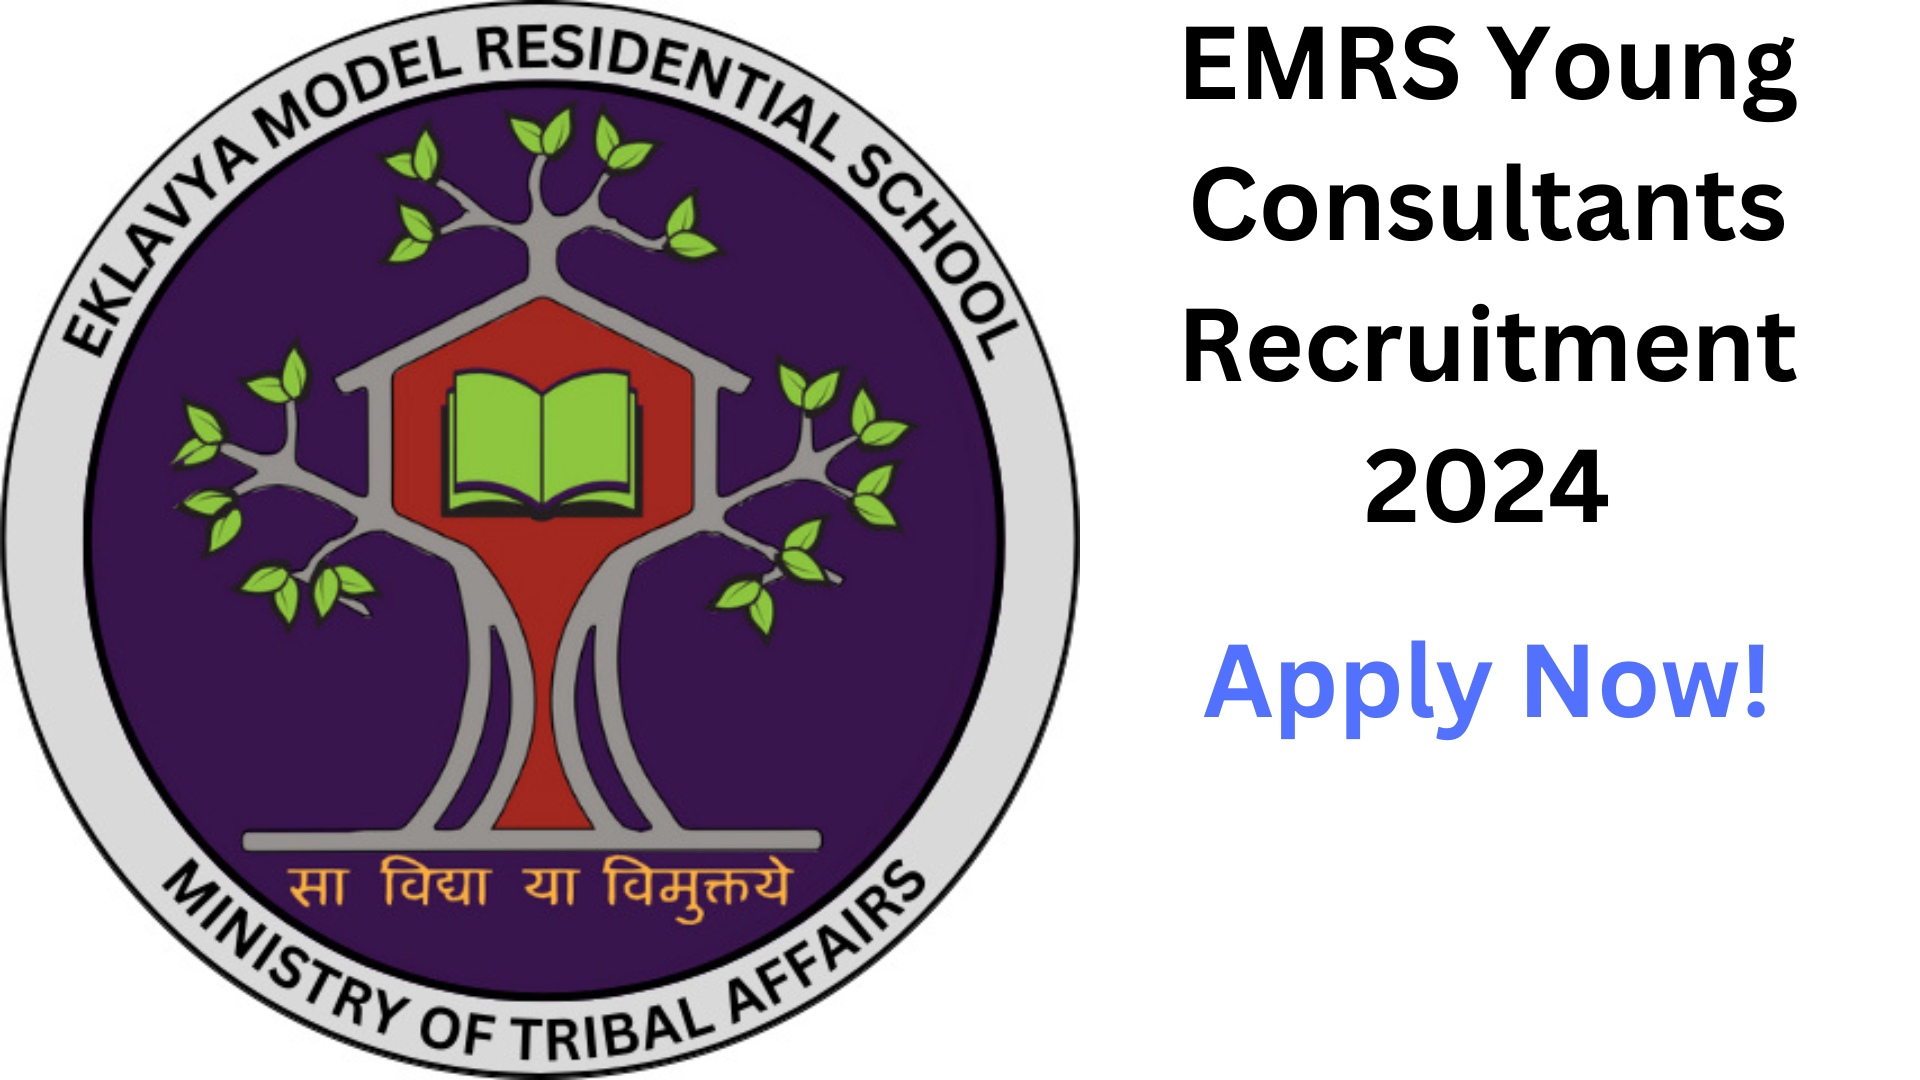 EMRS Young Consultants Recruitment 2024, Apply Now, Salary Up To 50,000, Eligibility Criteria, and More